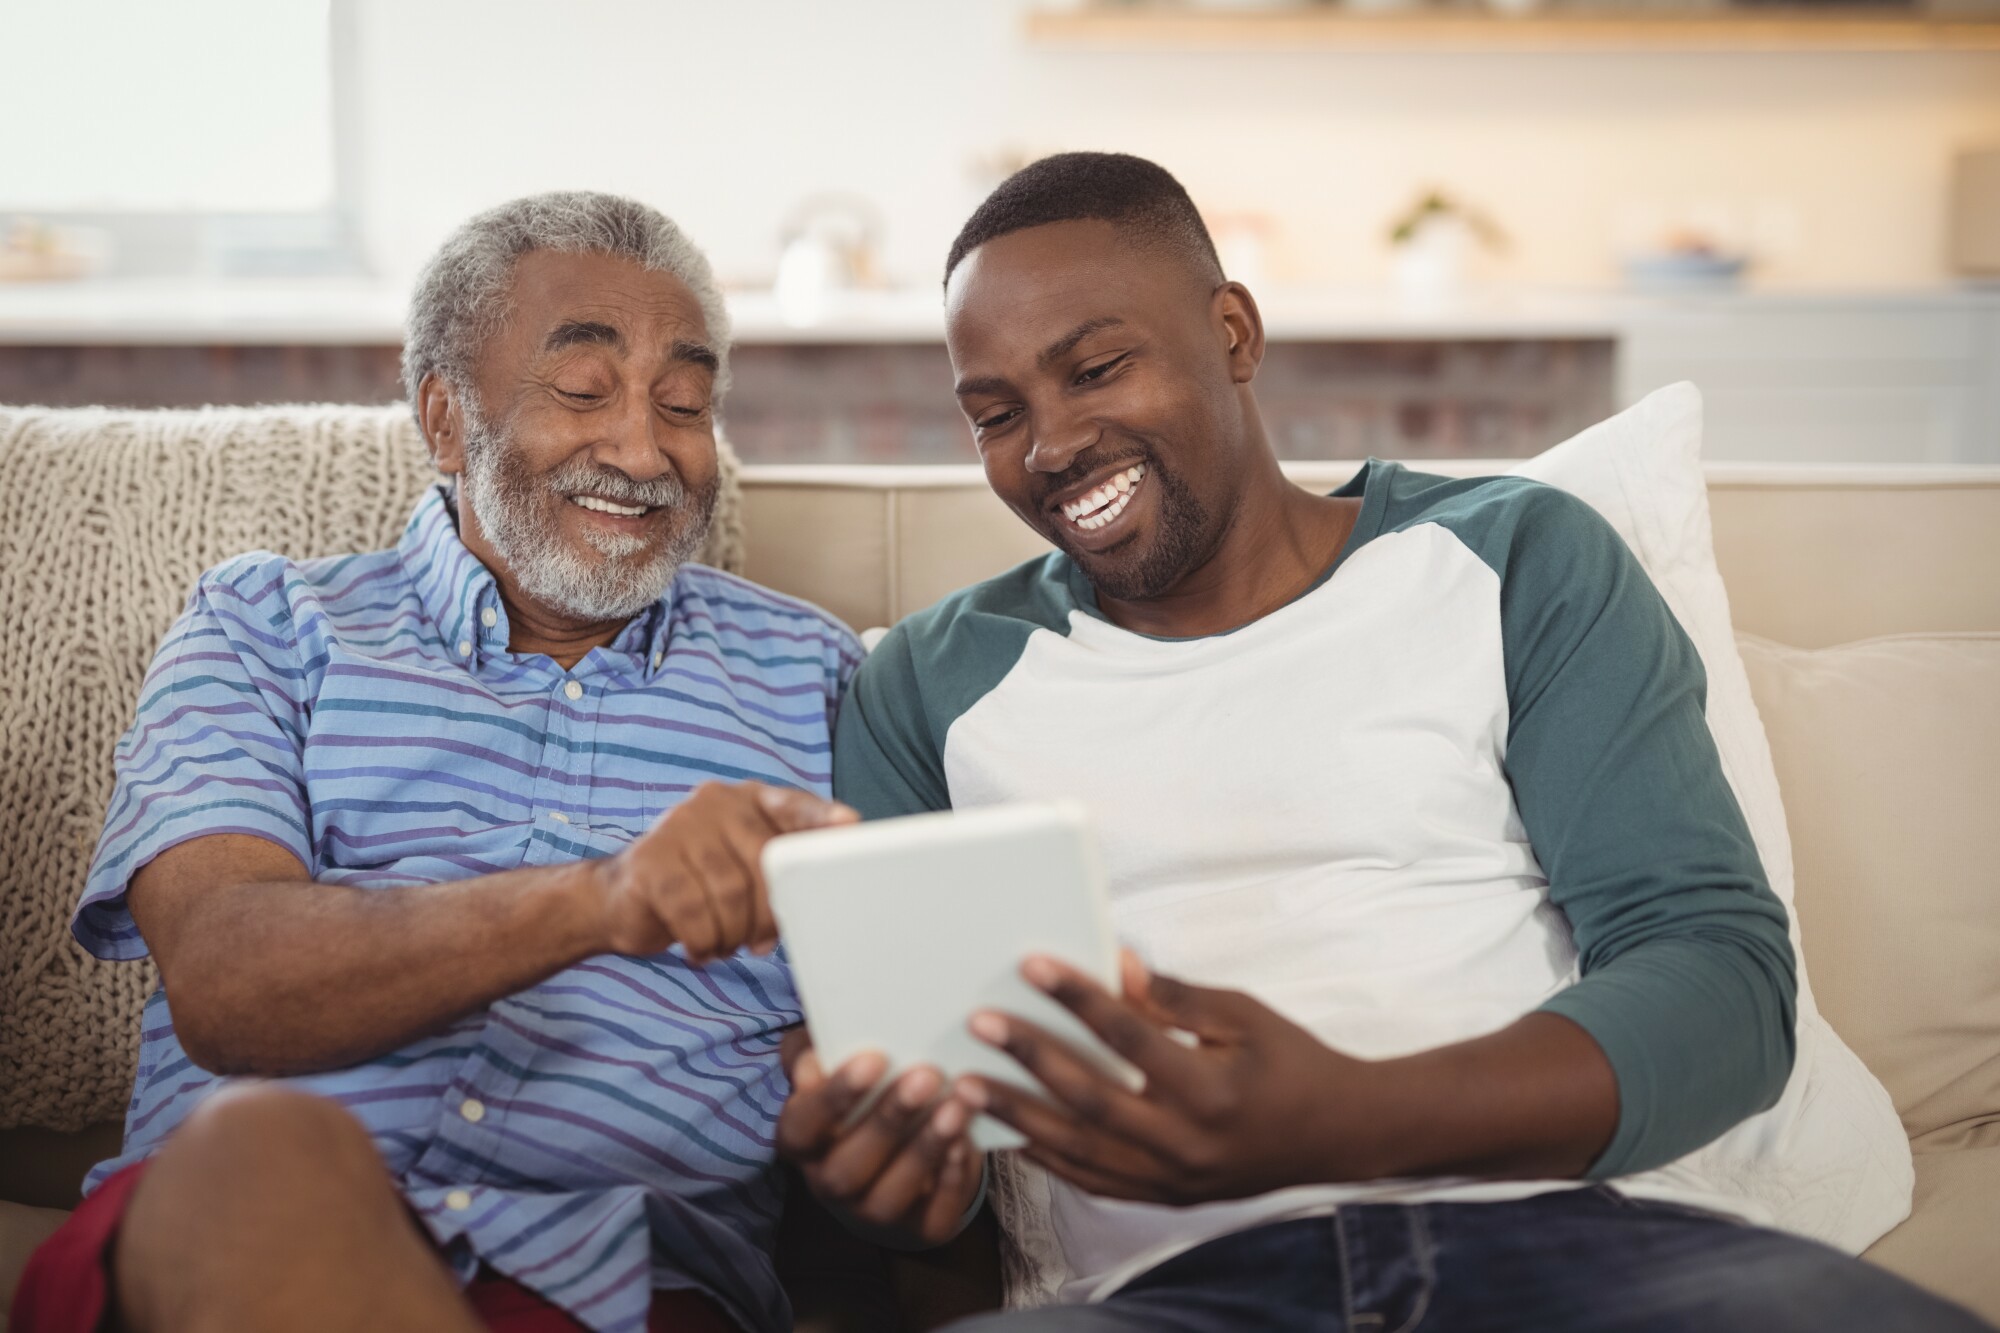 3 Expert Tips About Caring for Elderly Parents